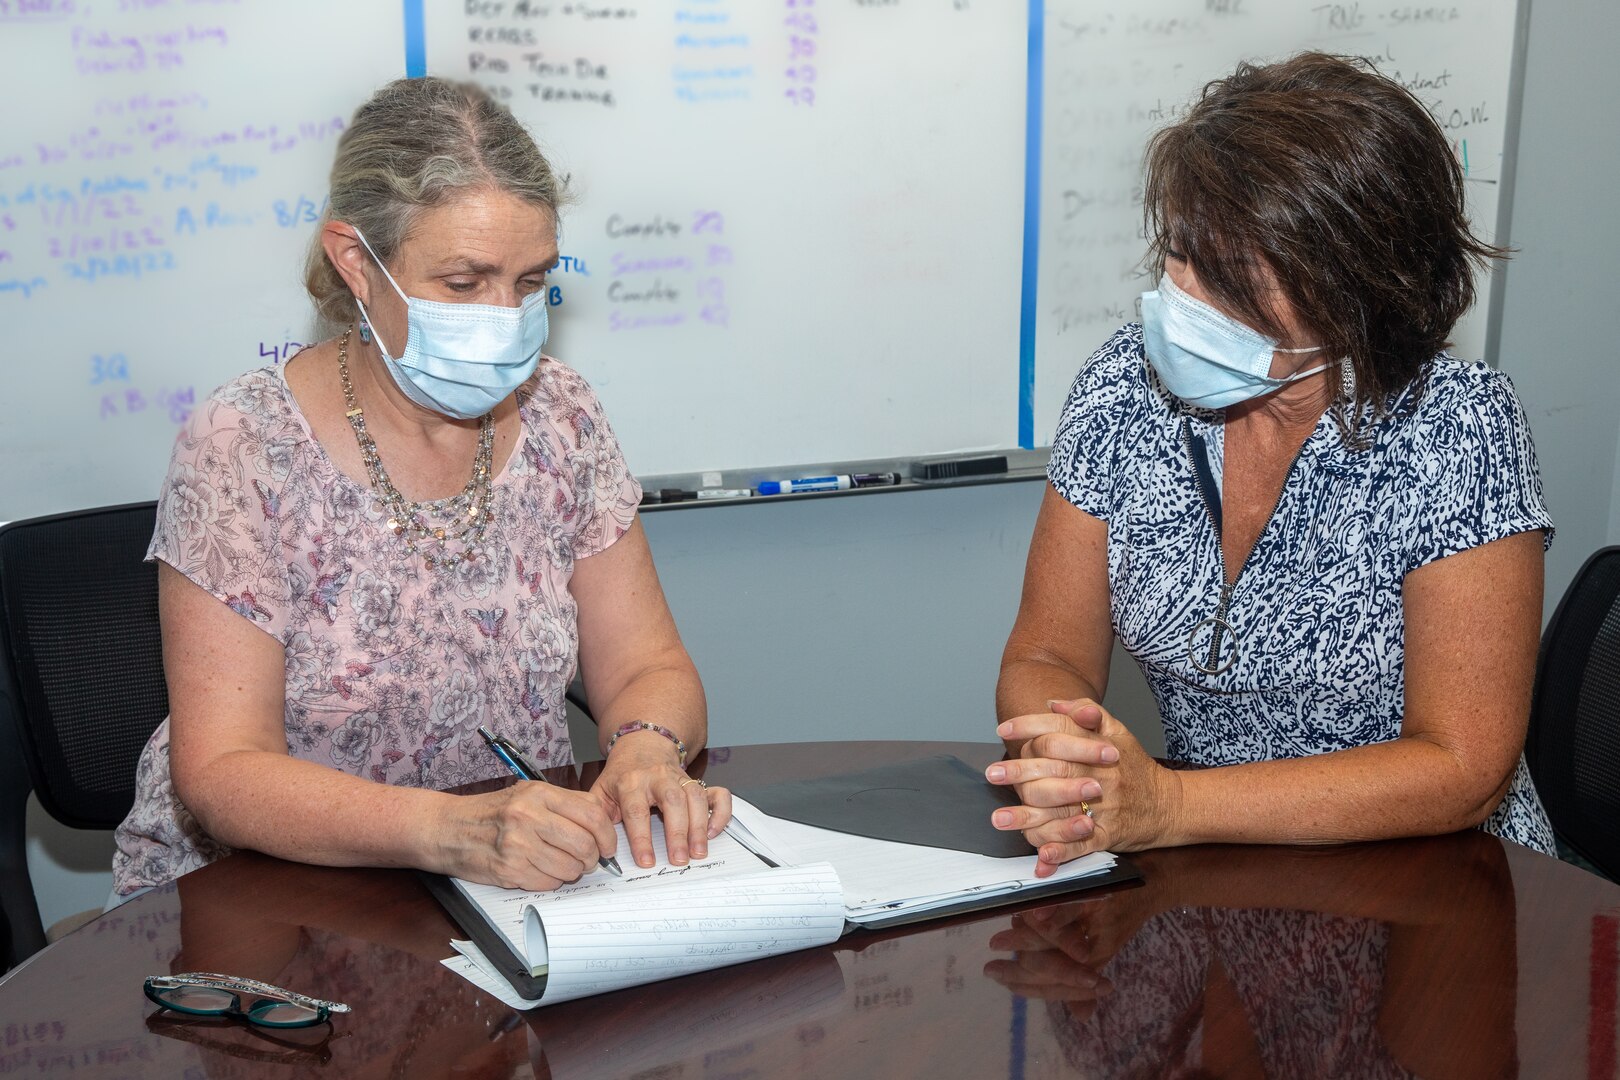 Nuclear Quality Division (Code 2350) Division Head Tina Hazard discusses assessments with Code 2350 Administrative Assistant Kim Zaner.